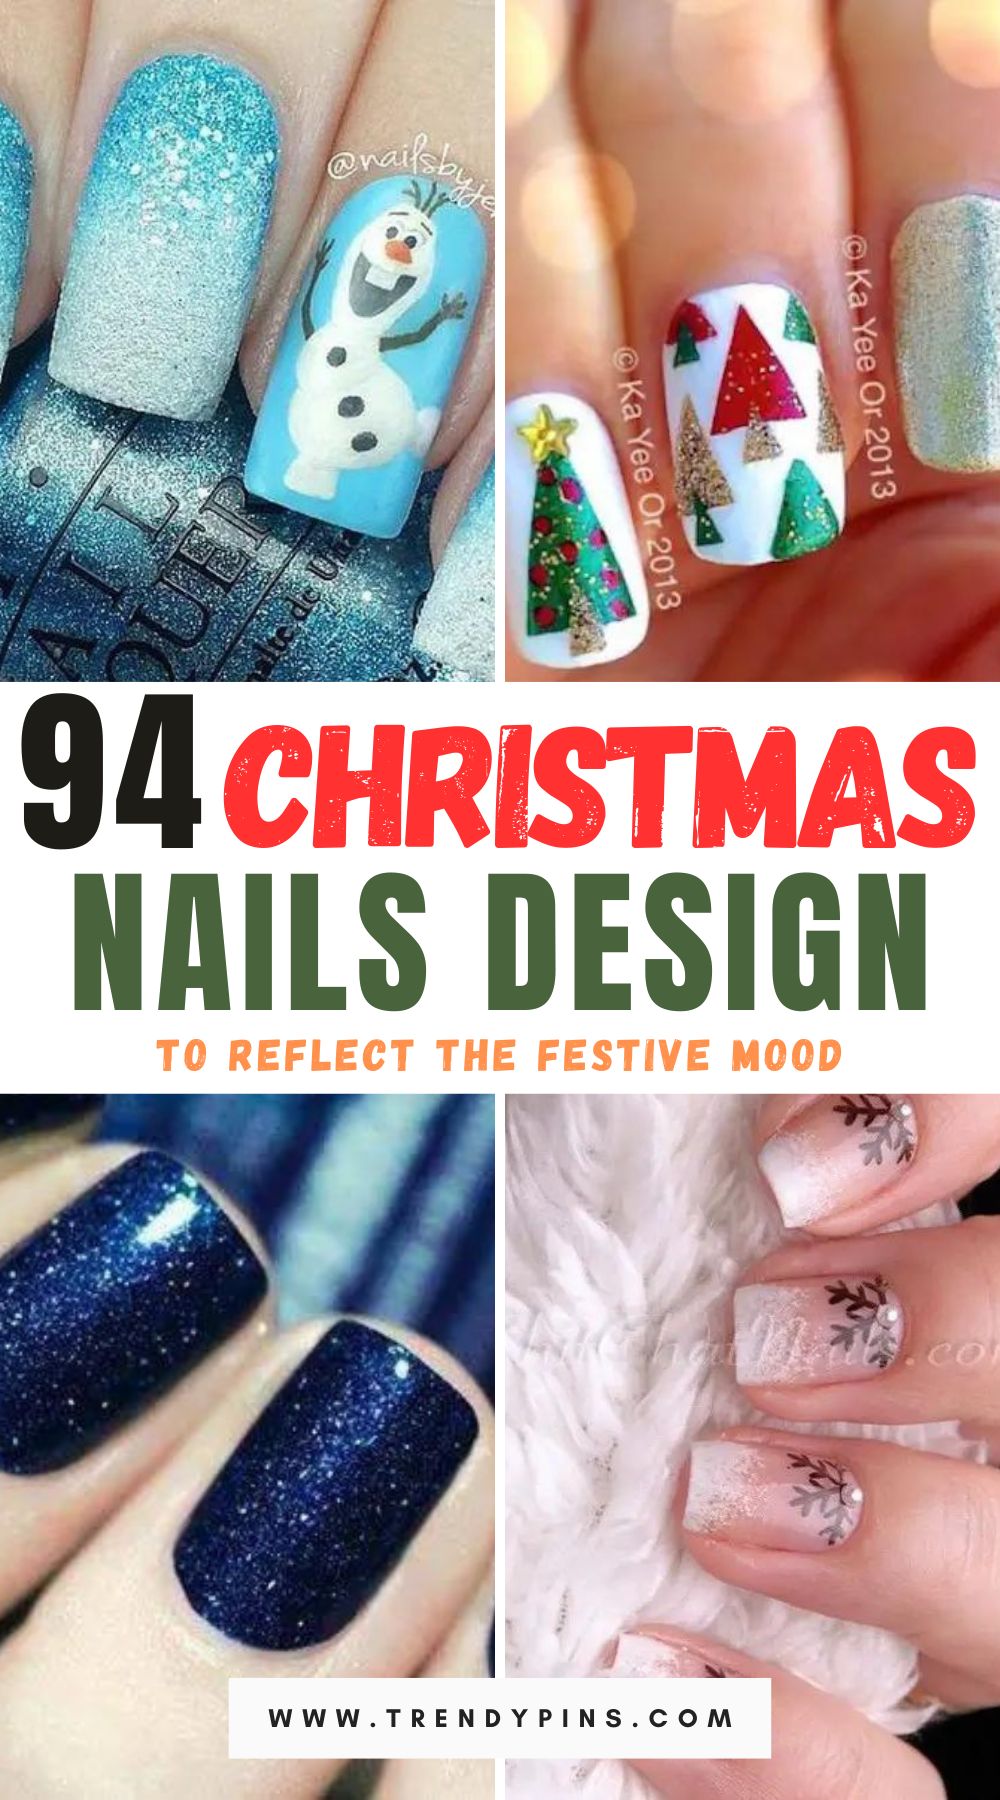 Deck your nails with the hottest Christmas trends! Explore our collection of festive nail art ideas that will reflect the holiday mood in every dazzling detail. Click to discover the perfect manicure inspiration for a season full of glamour and joy.